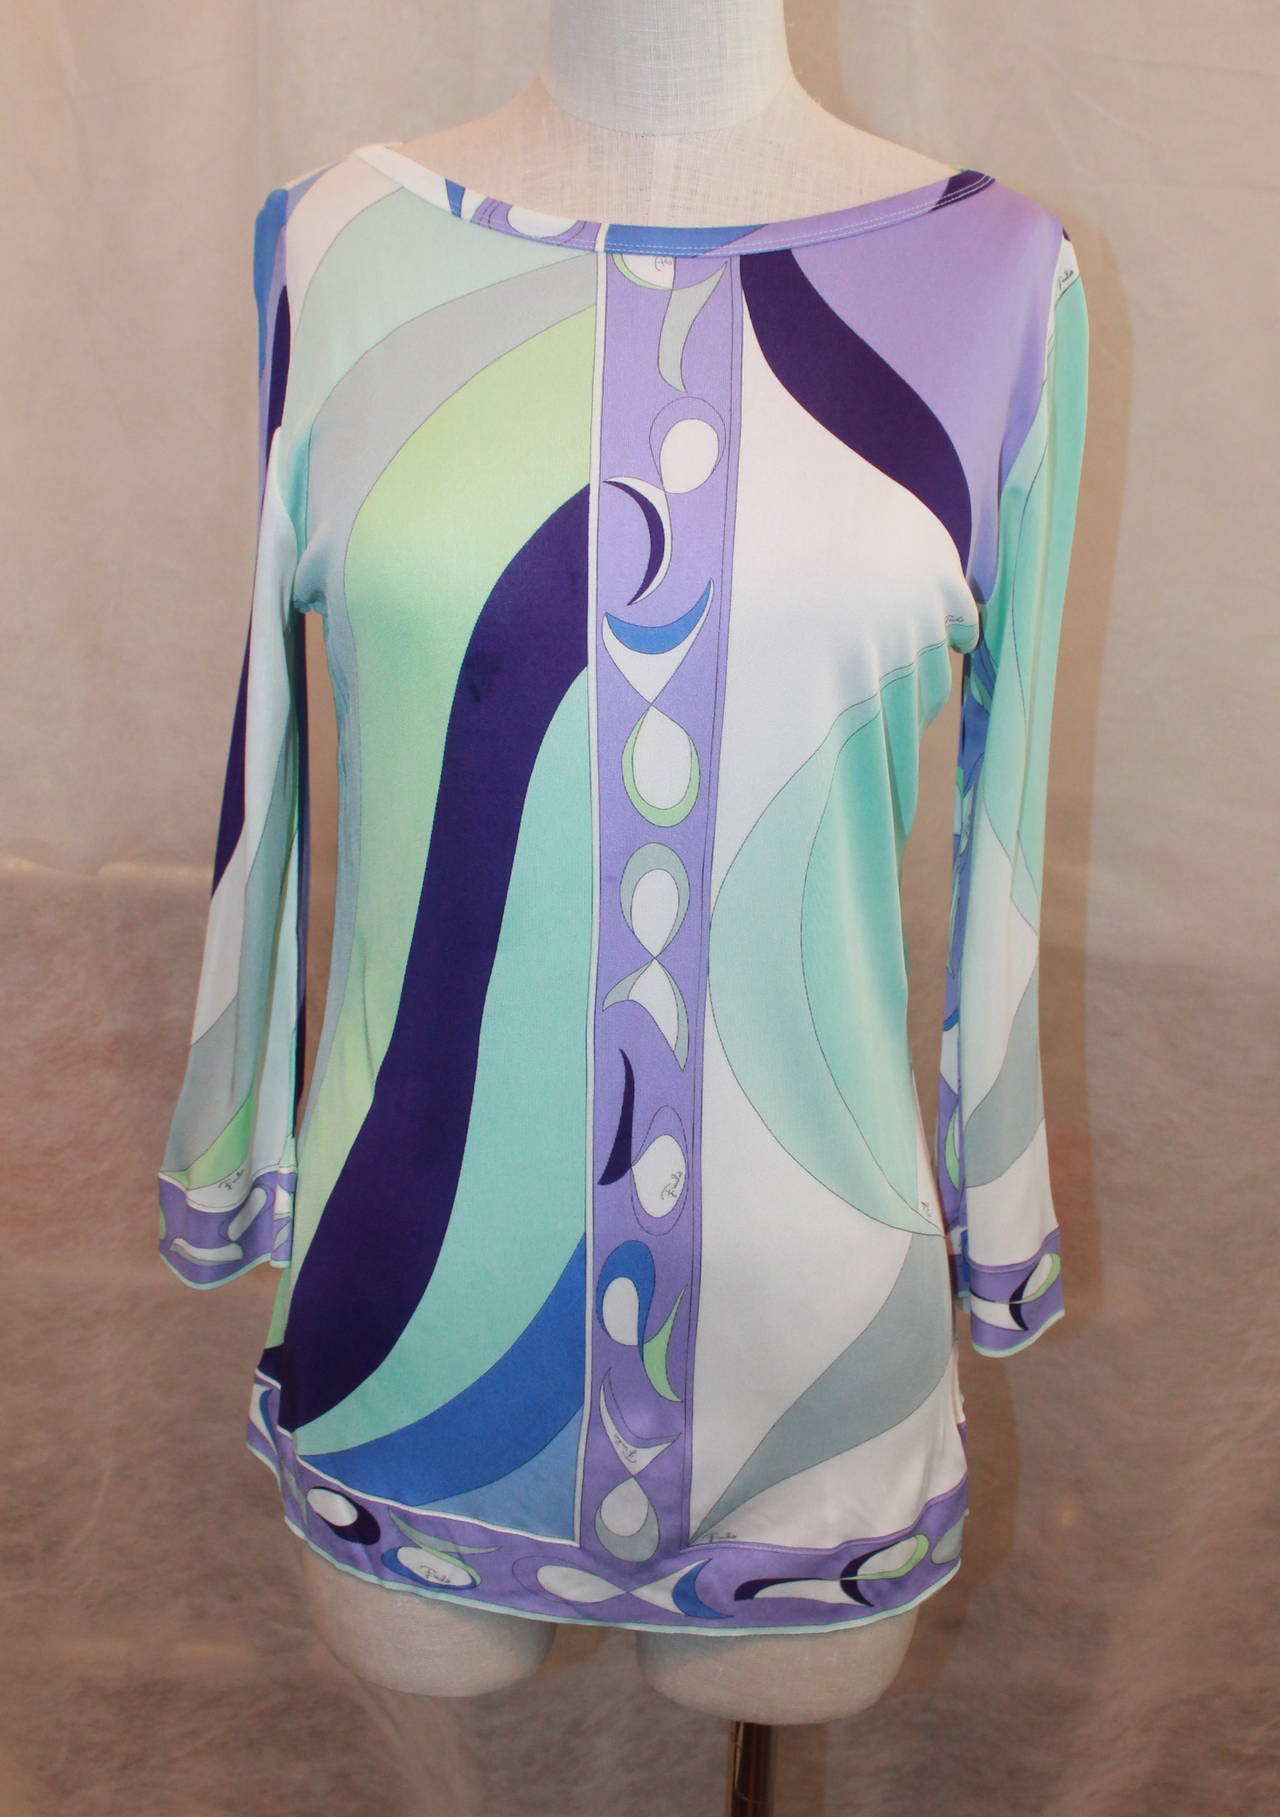 Emilio Pucci 1990's Vintage Aqua & Purple Printed Tunic Top - 12. This long sleeve top is in excellent vintage condition and is 100% rayon. 

Measurements:
Bust- 35